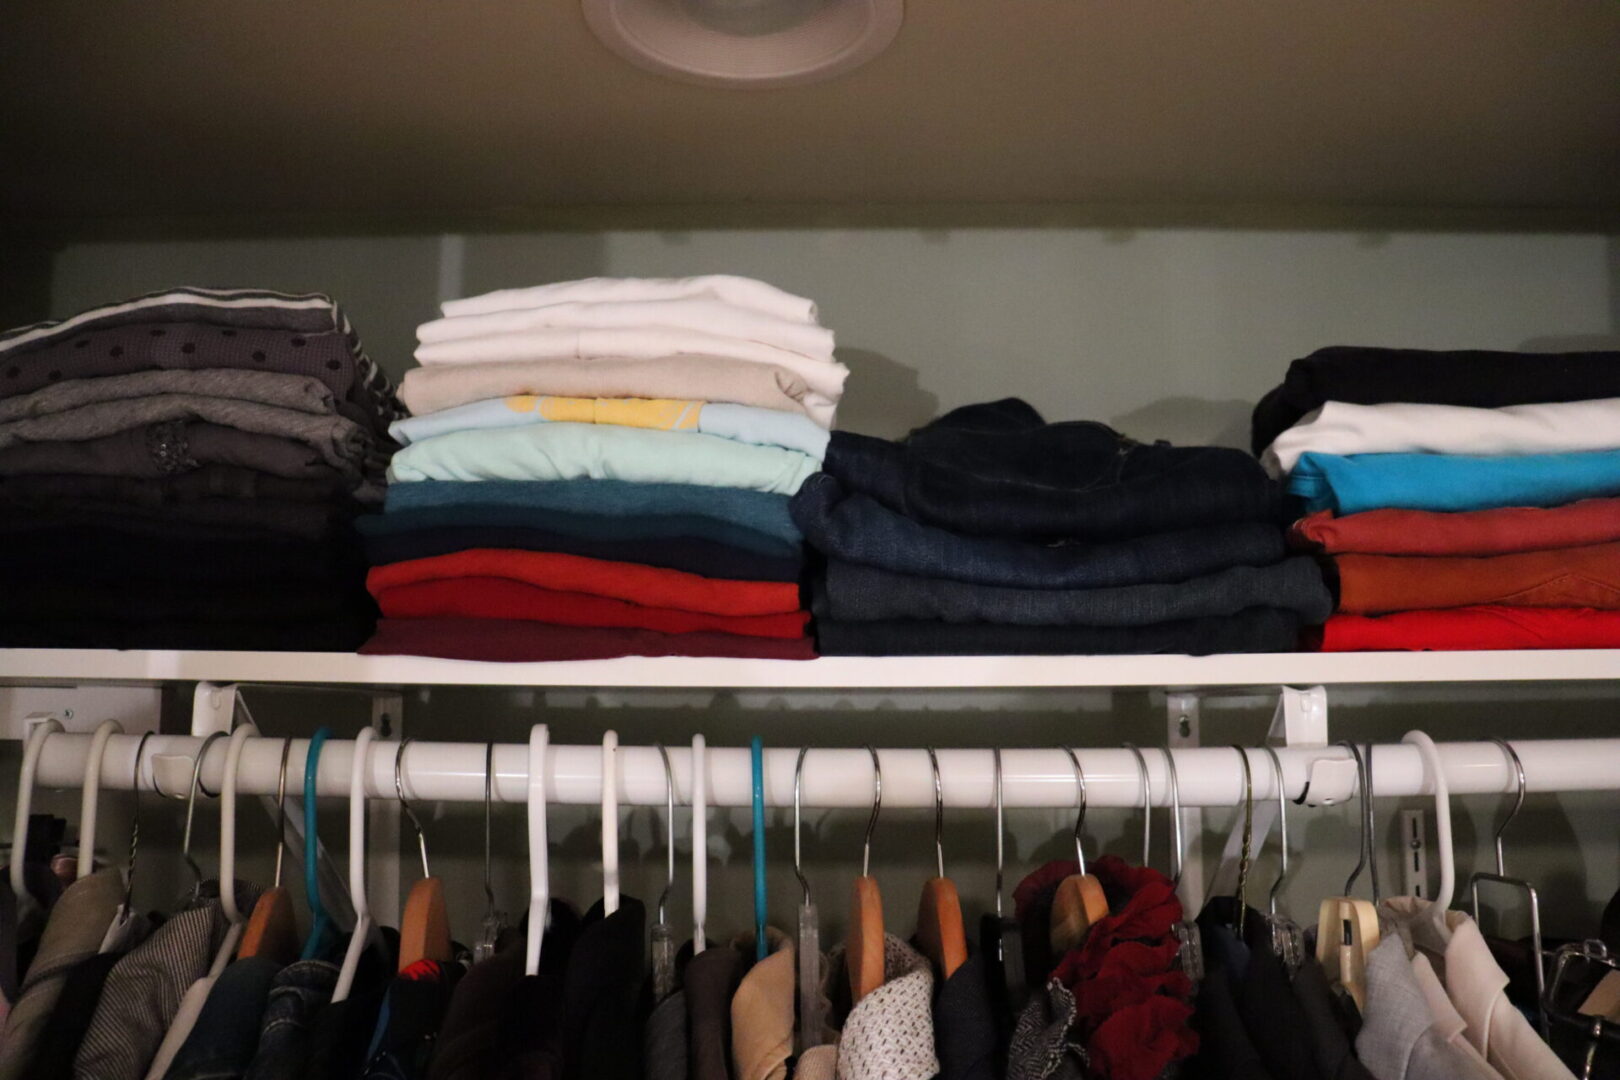 Shelf with folded clothes on top of a clothes hanger rod